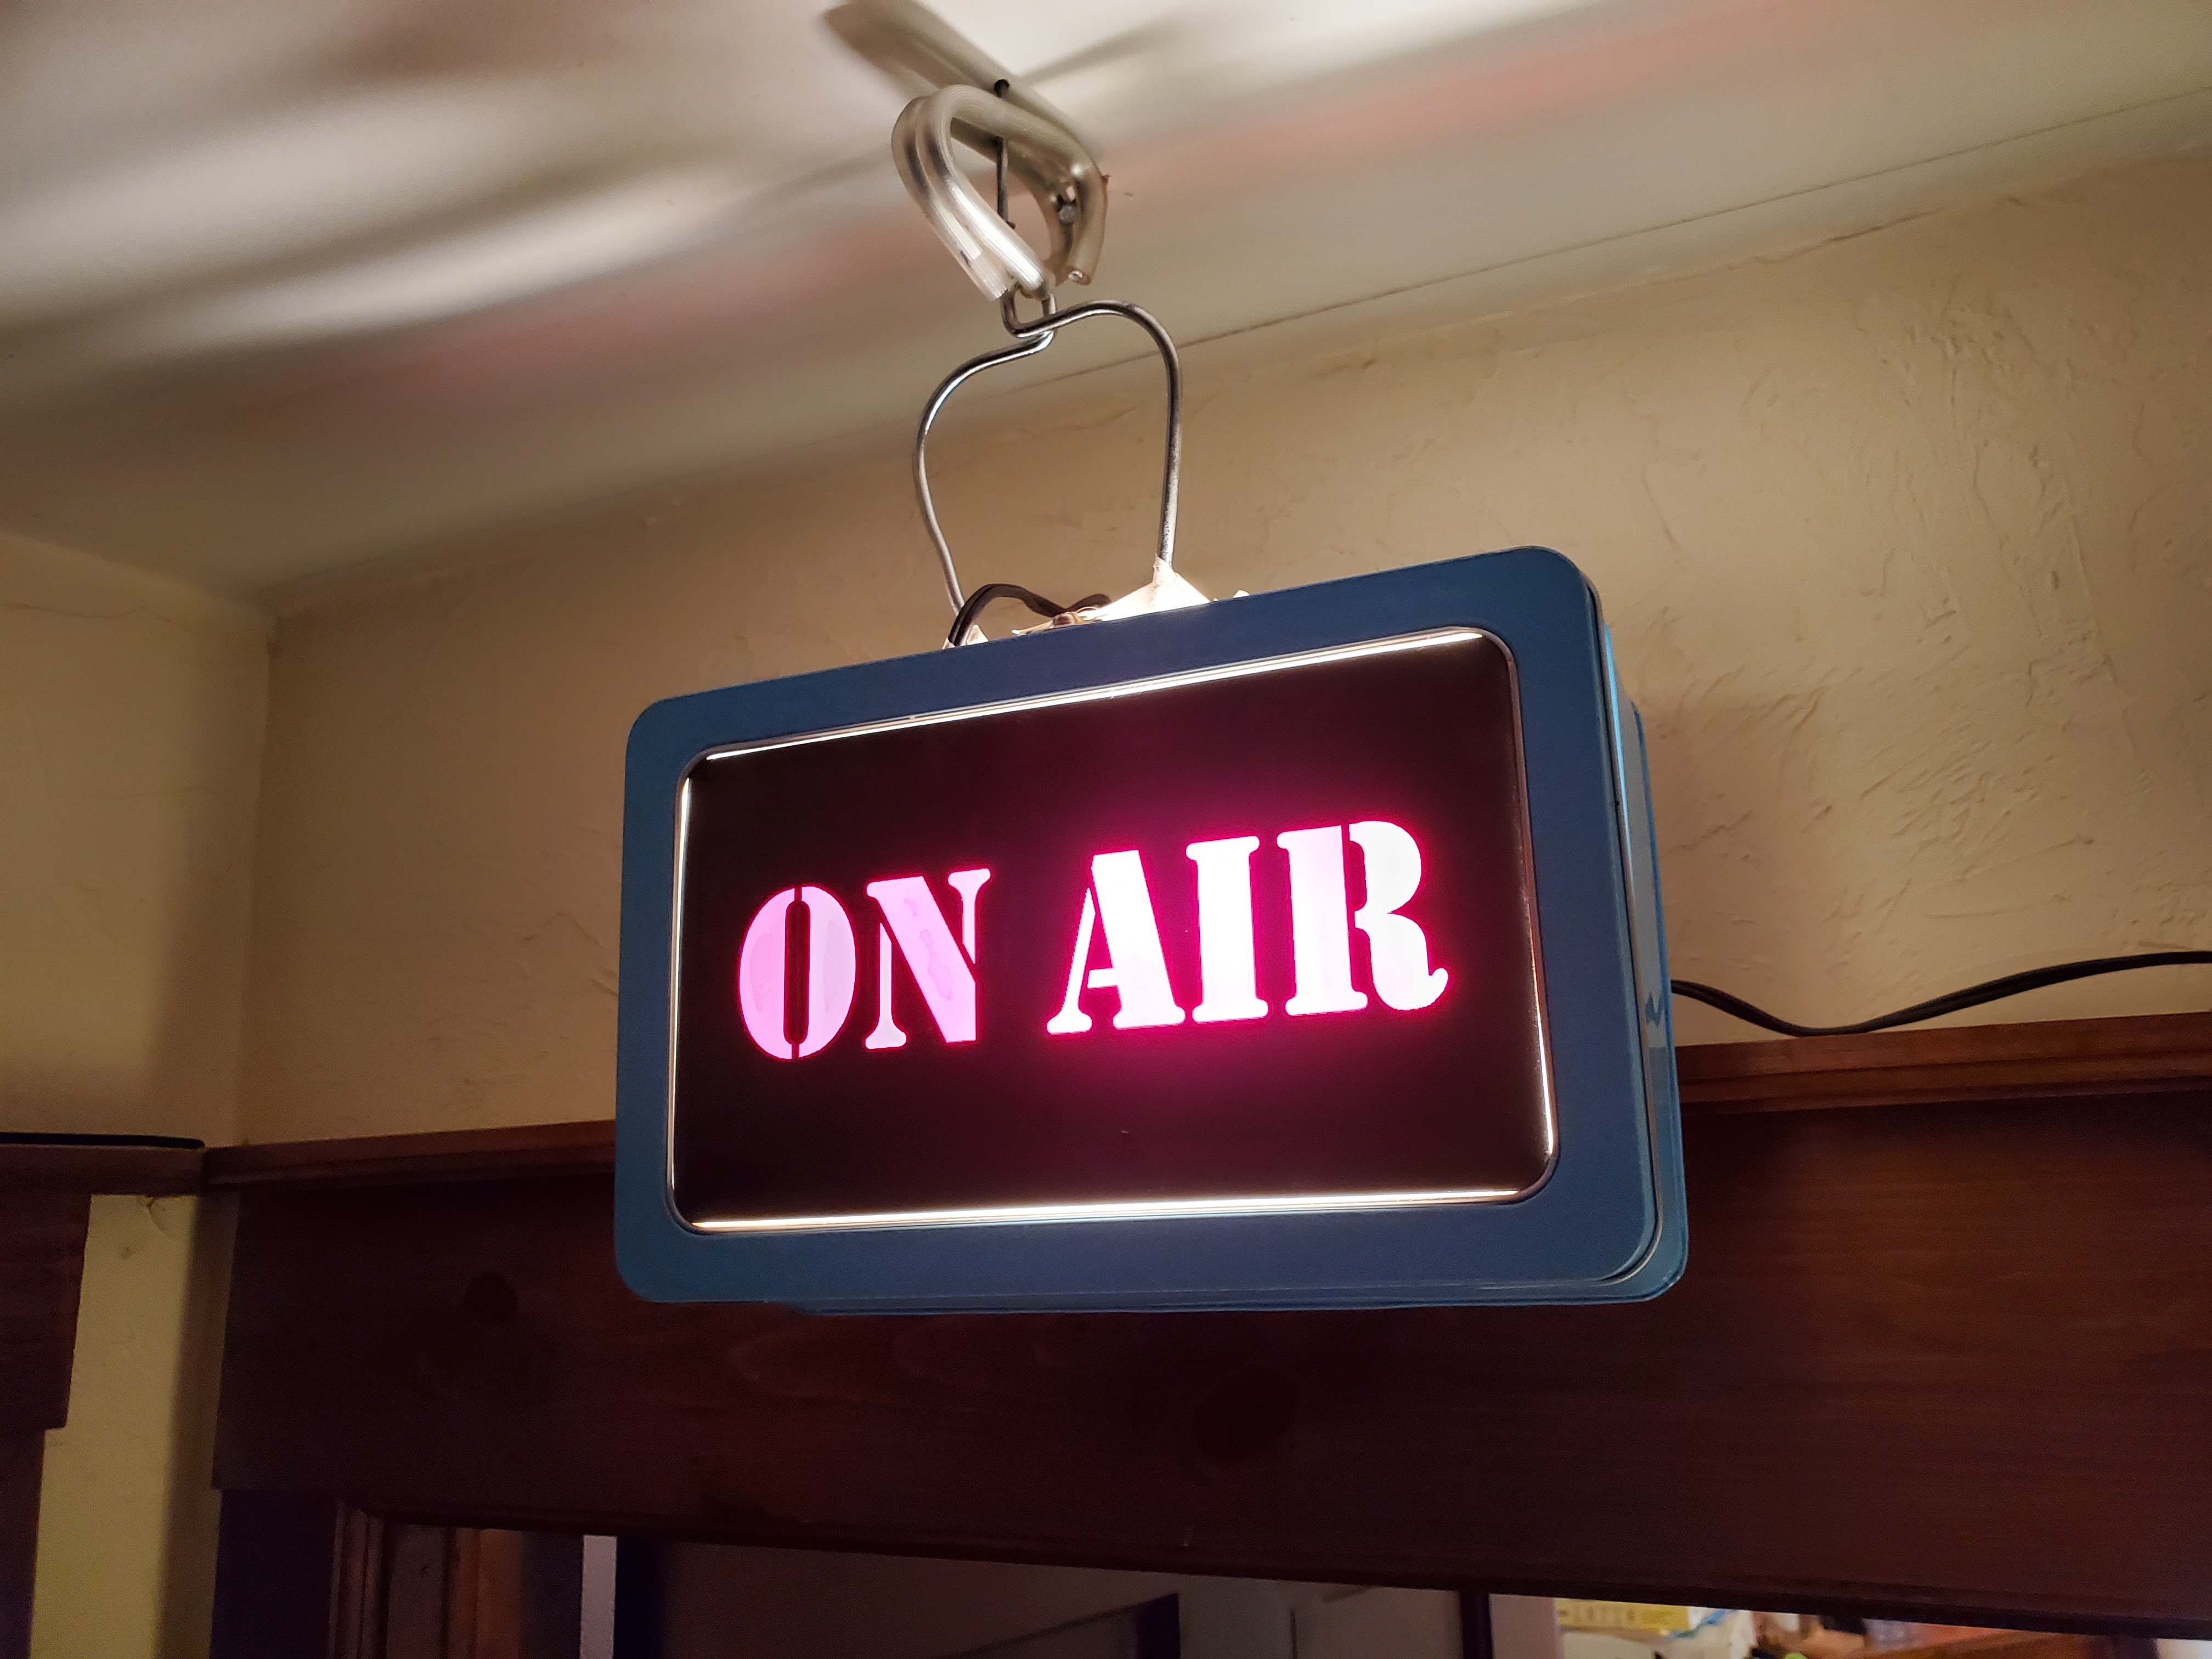 Shows a make-shift 'on-air' light of the kind you would find in a news radio booth to indicate the host is live on air.